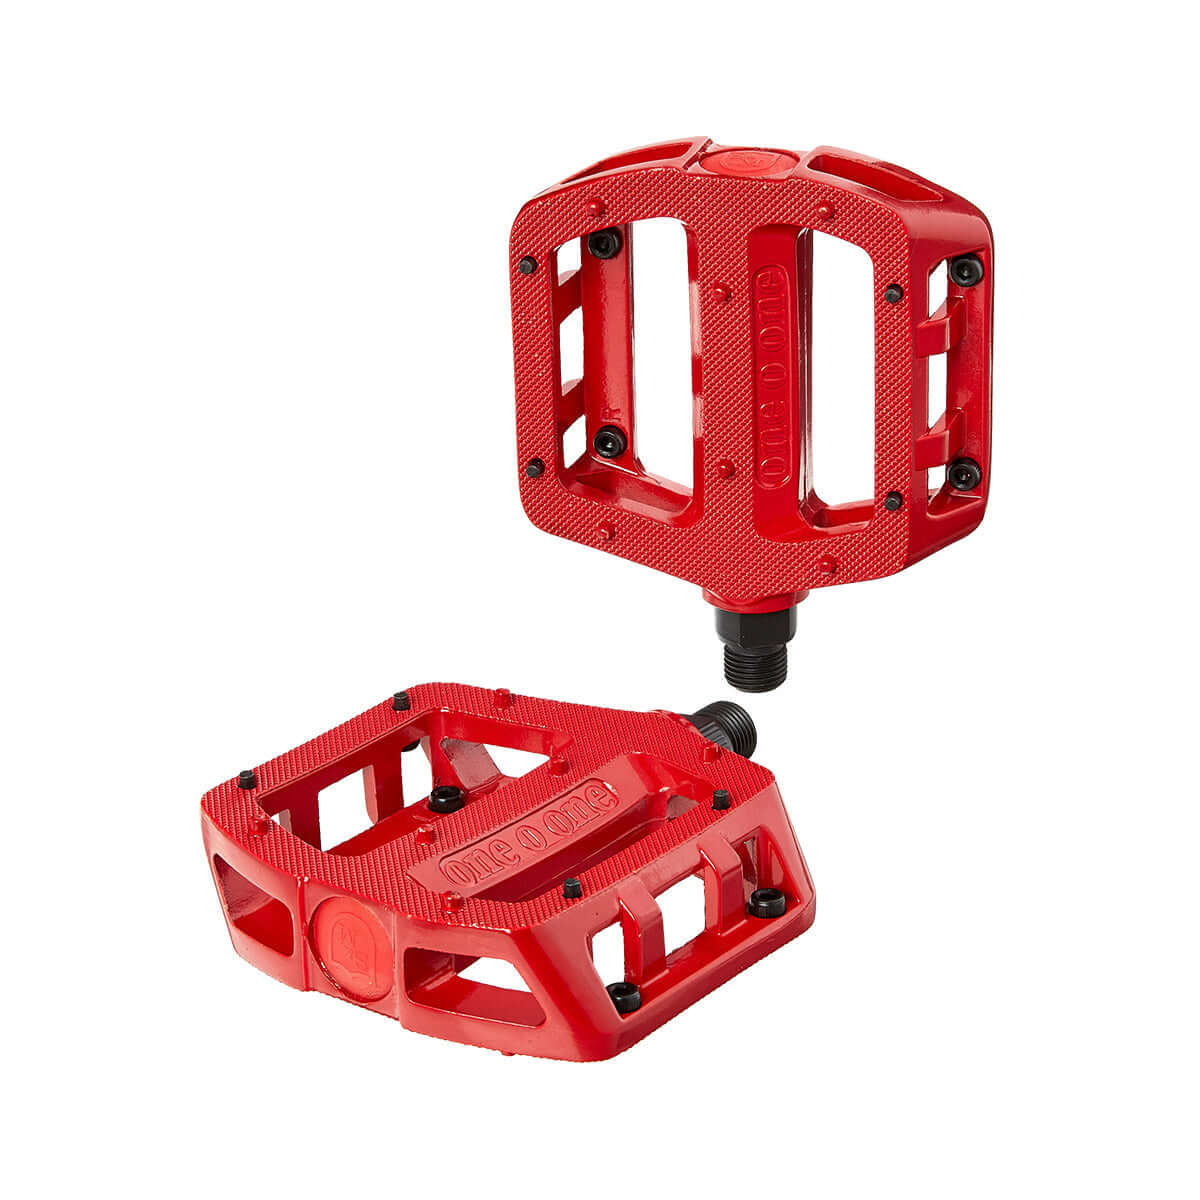 0 PEDAL LOOSE BALL, RED-Cast alloy platform with reinforcements to prevent breakage. Combination of molded and replaceable pins for dialing in just the right amount of traction.Specs:Lightweight, strong alloy bodiesCompact 0mm square platformsScrew in tapered steel traction pinsFewer traction pins to reduce weightHeat treated & oxide coated chromoly spindles (9/6” only)Precision ball bearingsRecessed dust shieldsWeight: 2.0 oz (595 g)-5050 Bike & Skate